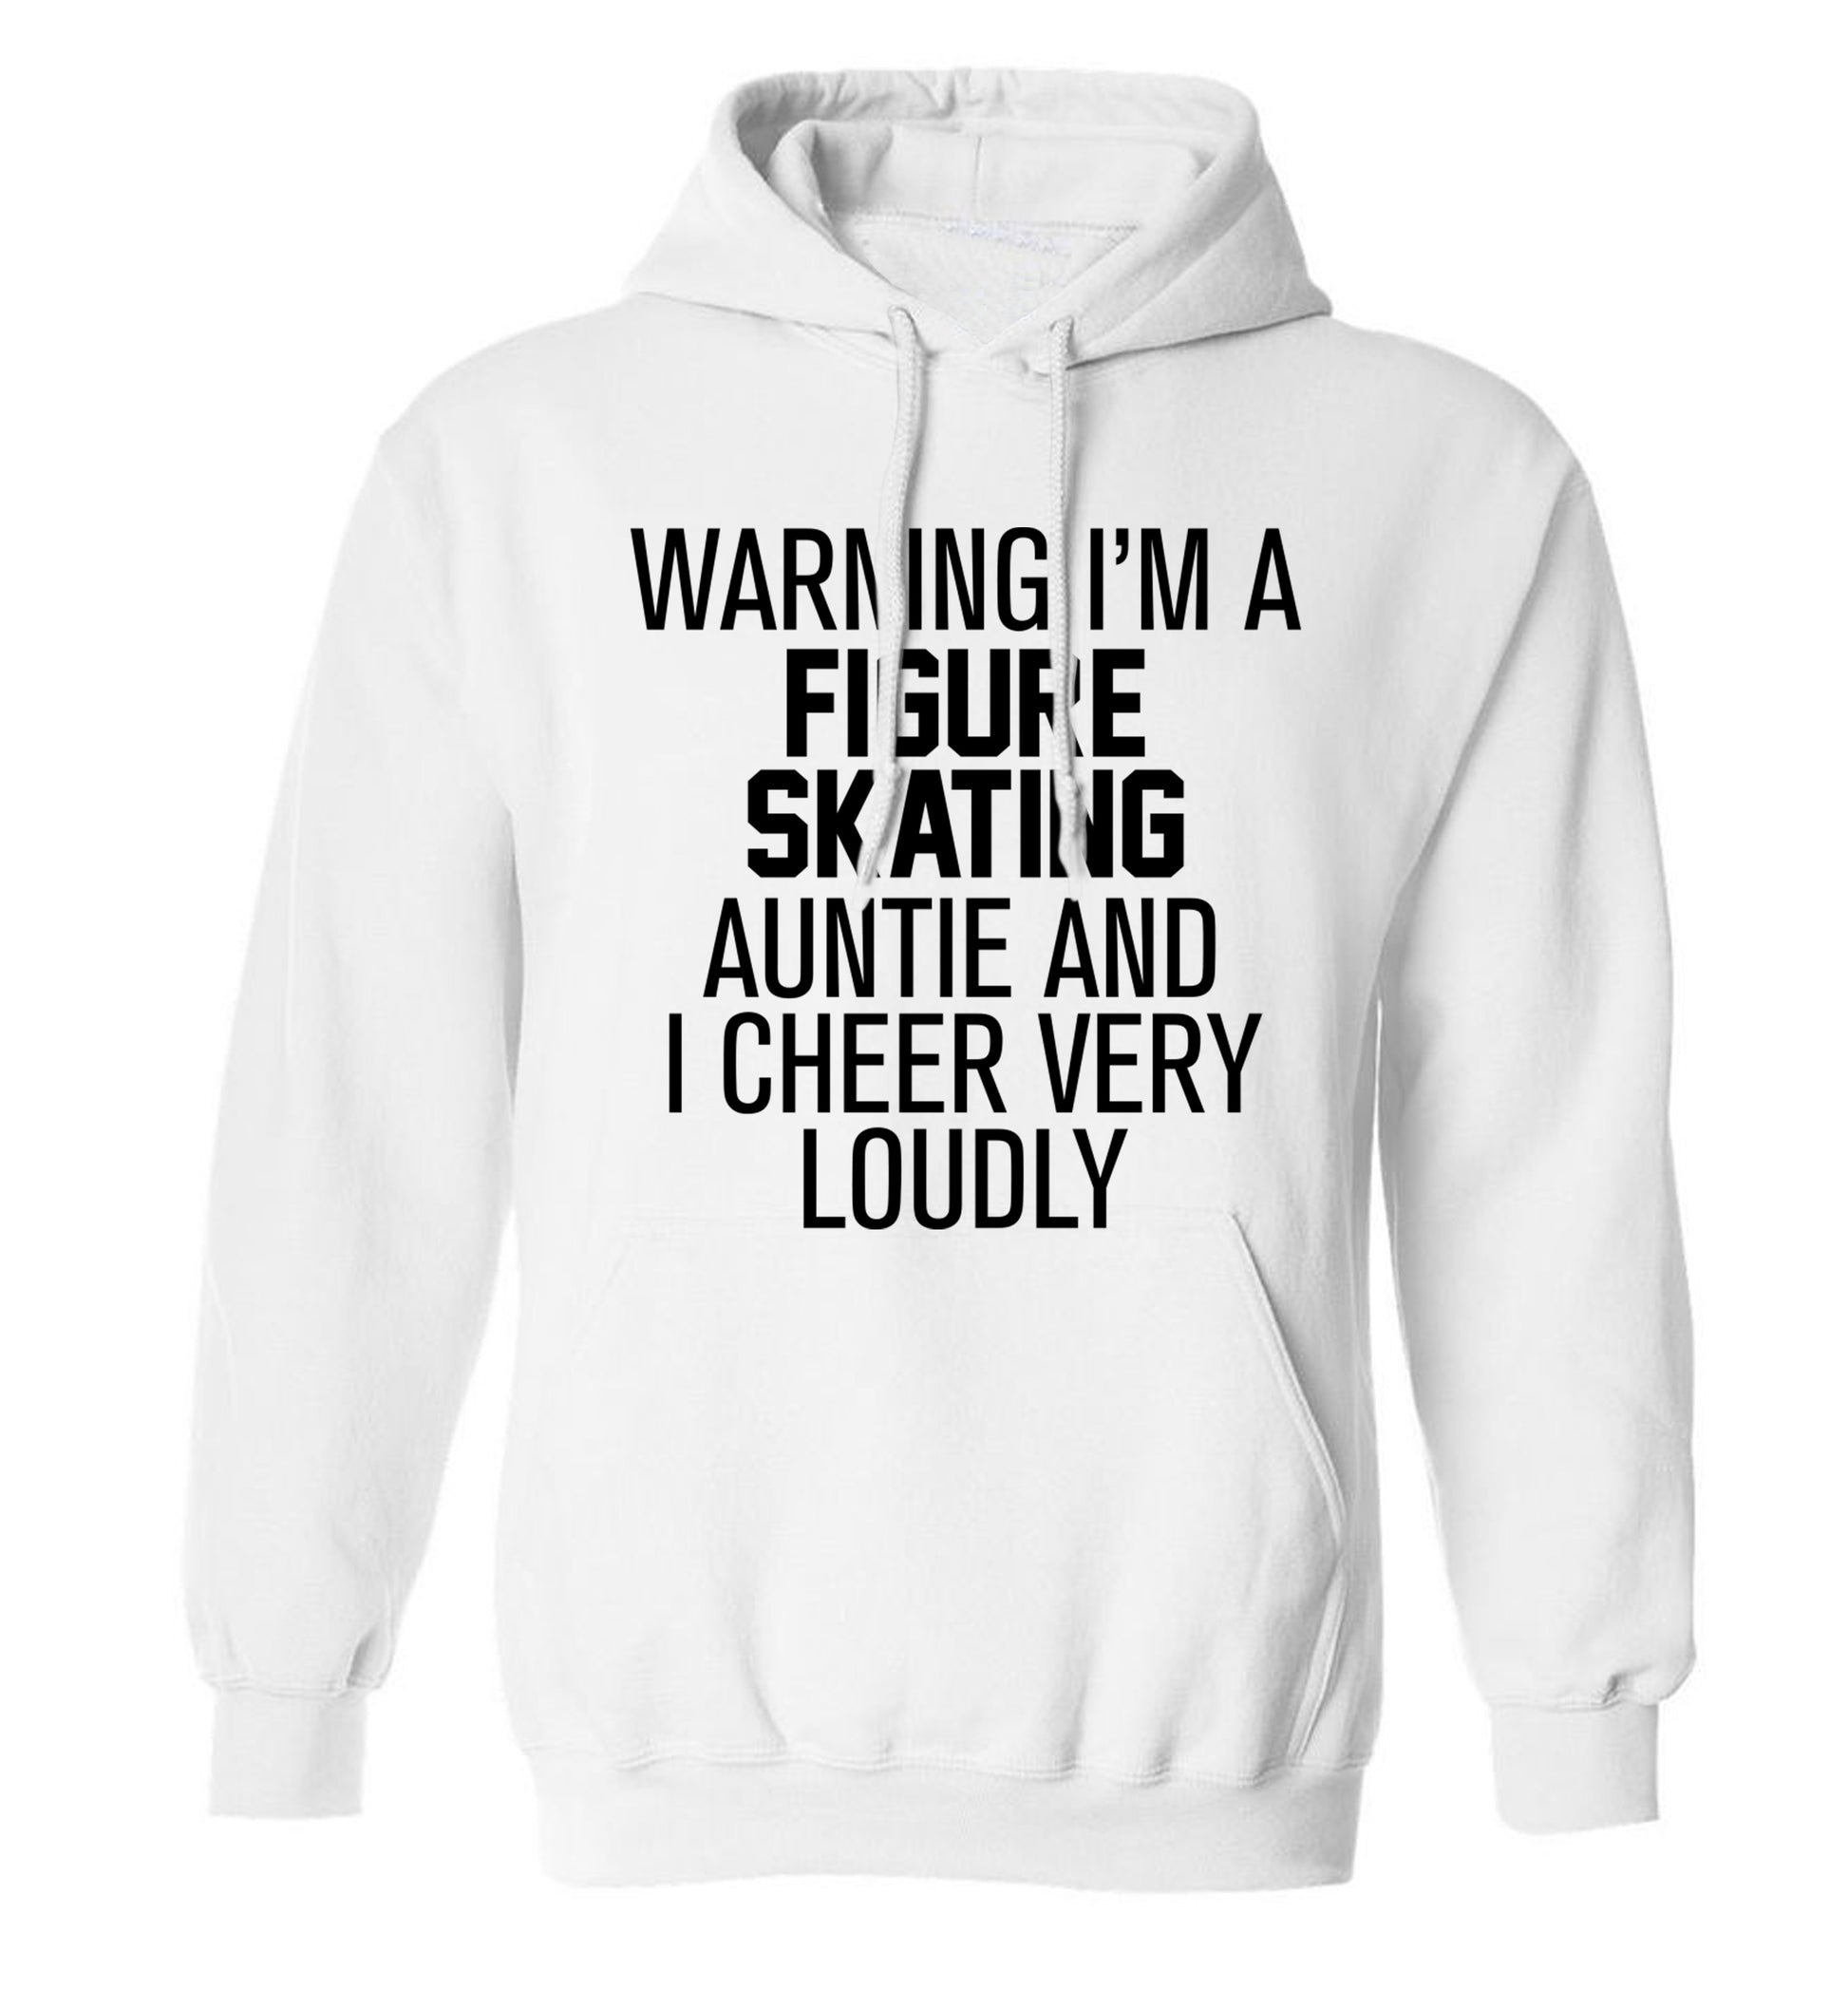 Warning I'm a figure skating auntie and I cheer very loudly adults unisexwhite hoodie 2XL